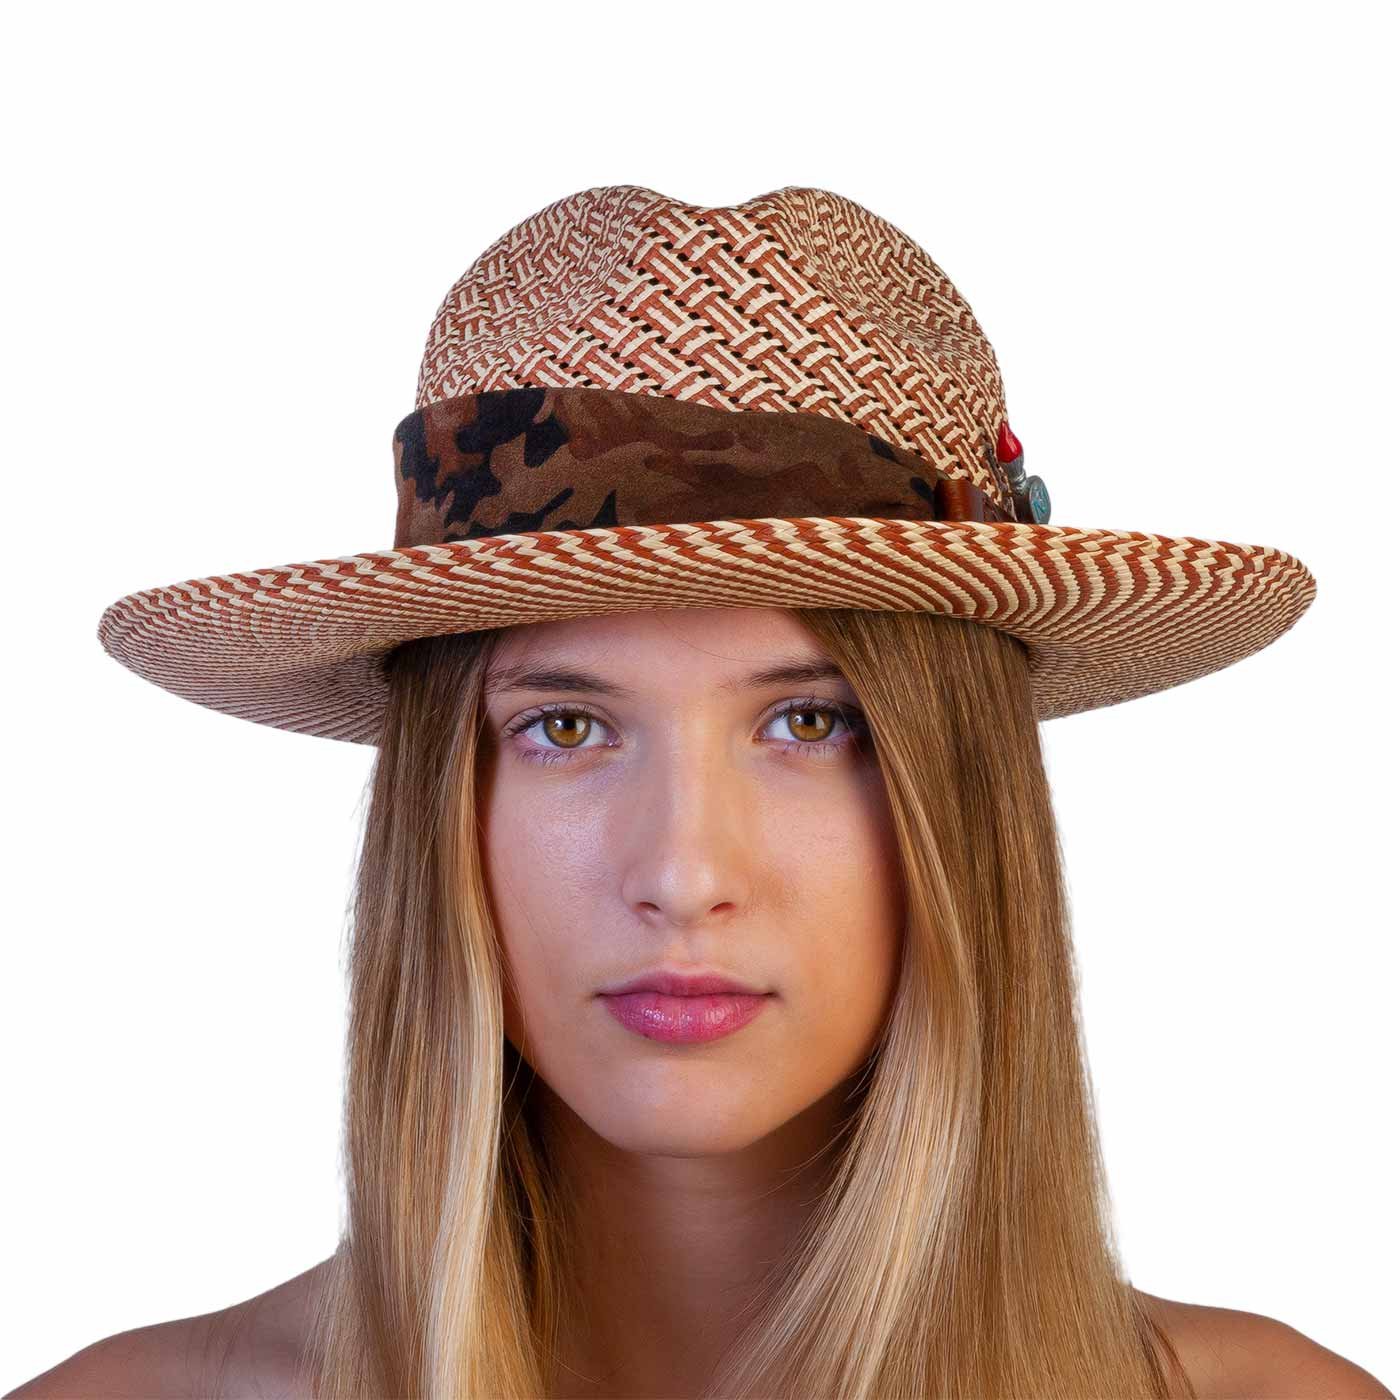 HUNTING HAT FRONT